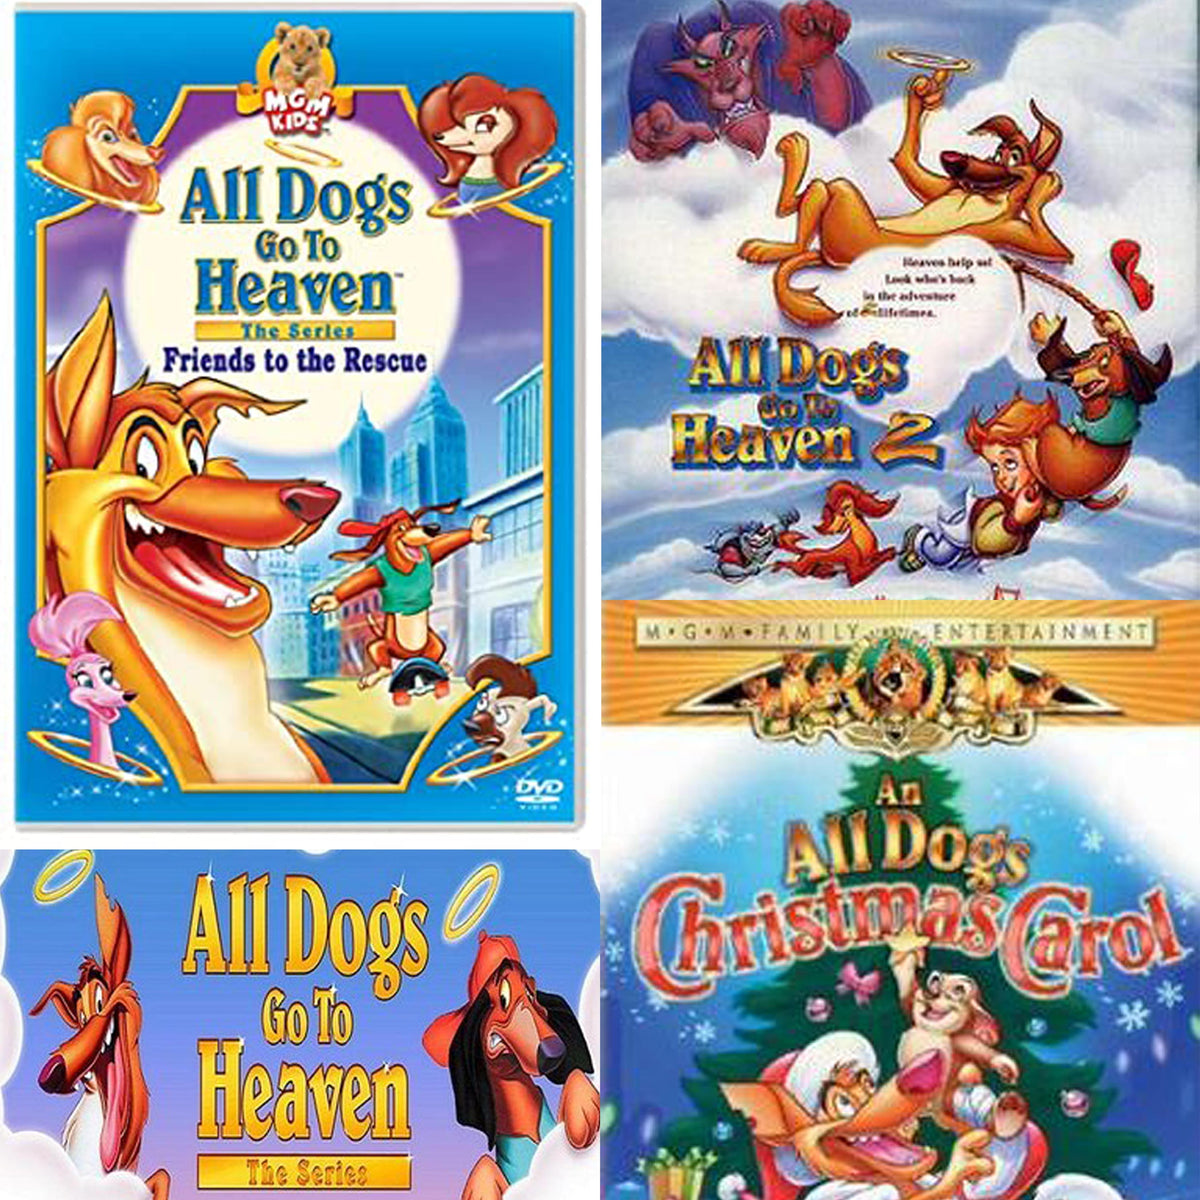 all dogs go to heaven 2 red